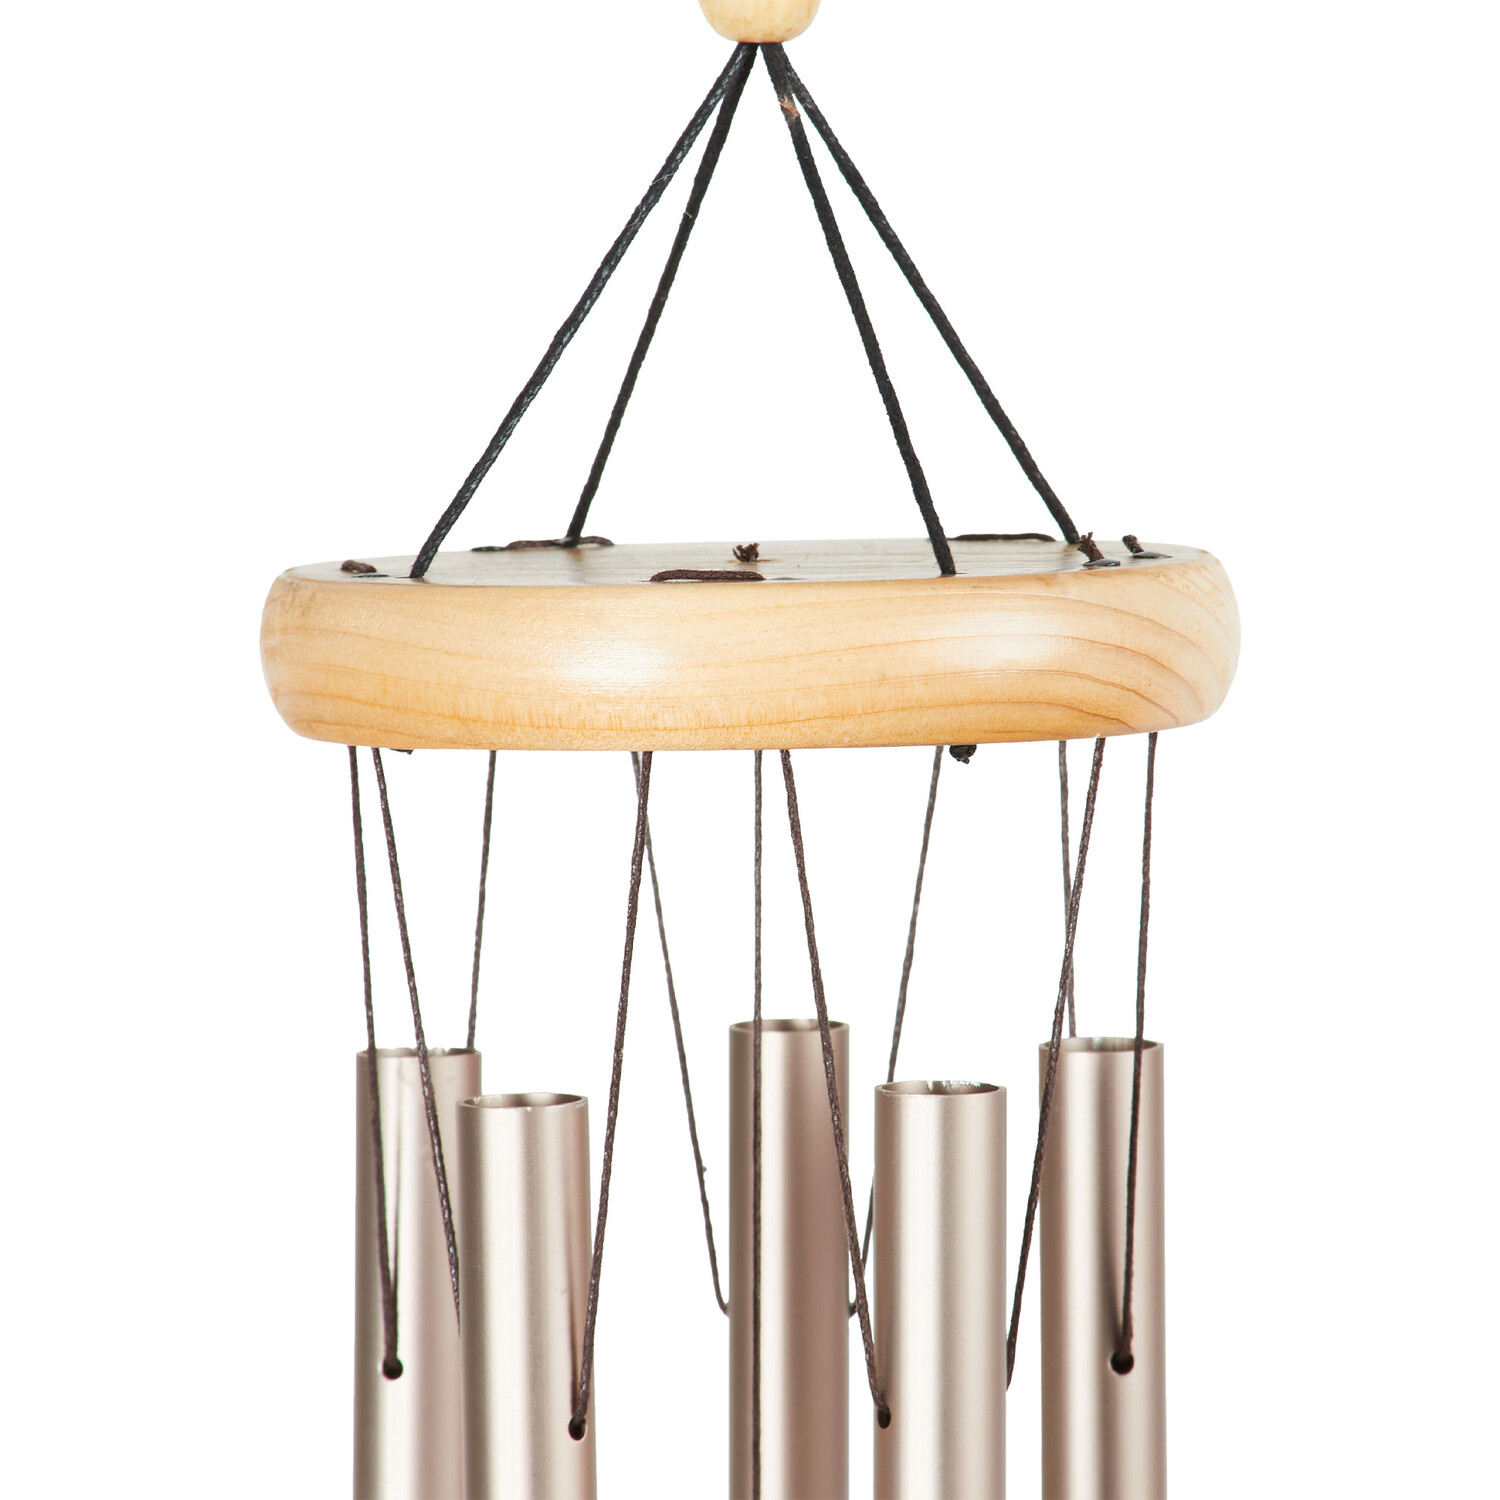 Wooden Windchime - Brown Image 3